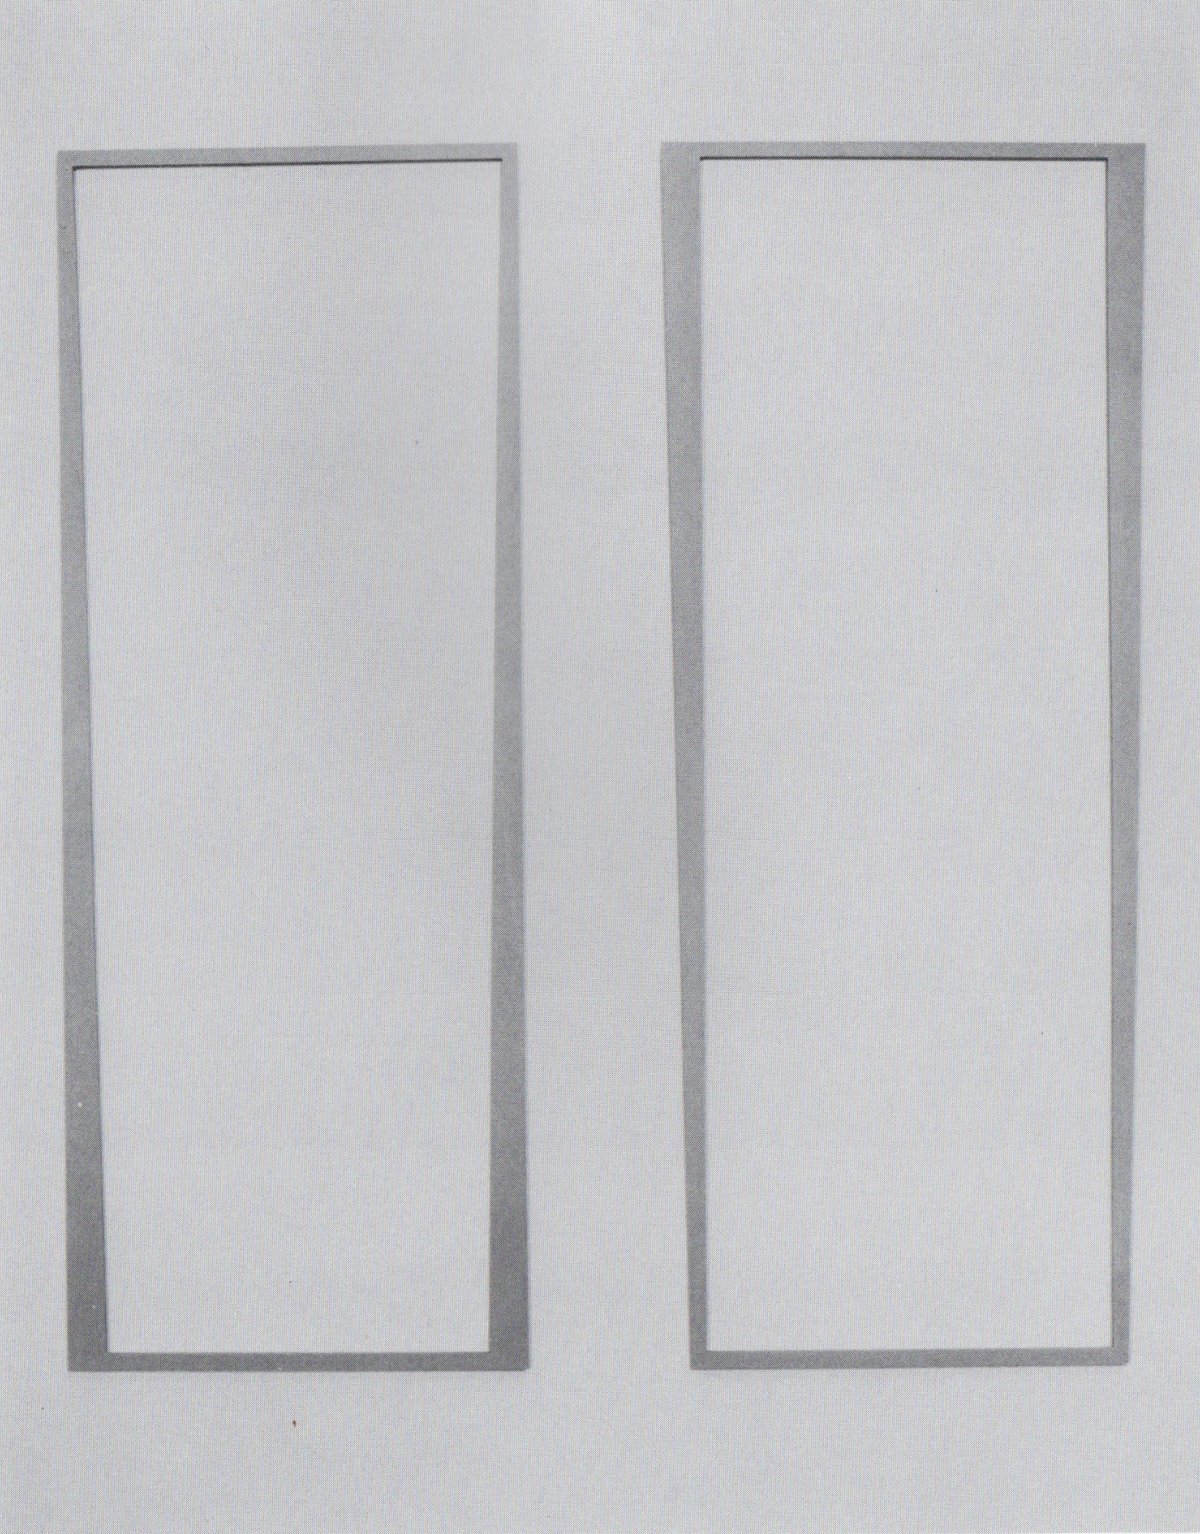 fig. 5: &quot;two frames III&quot; (1979), acrylic on wood, 143 x 56,5 cm